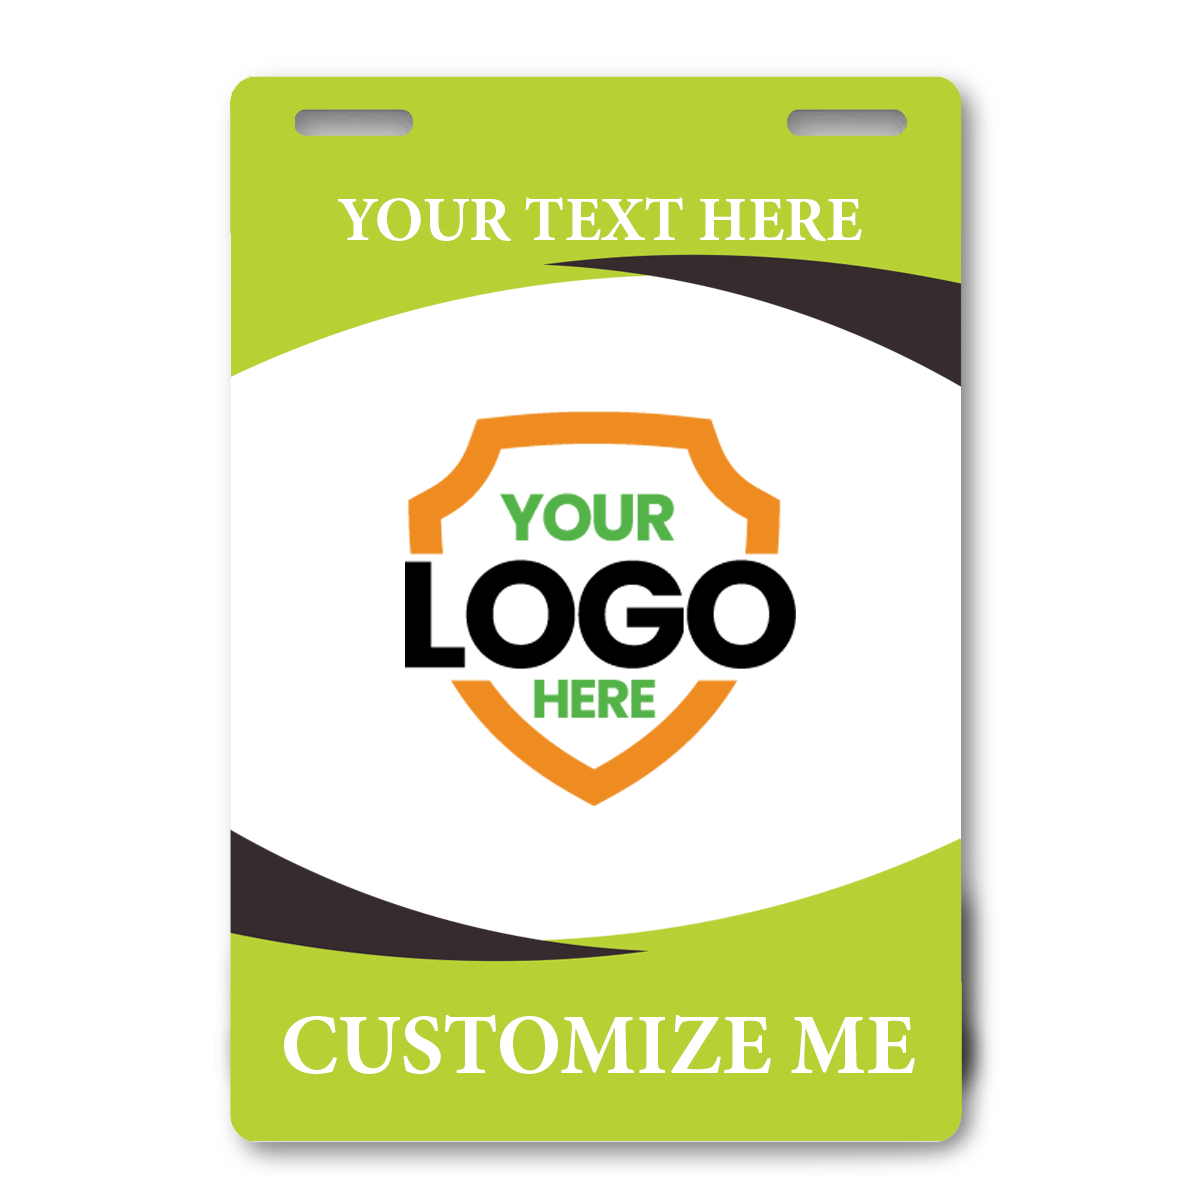 Custom Printed Event Badges With Two Slot Holes - Design It Your Way!